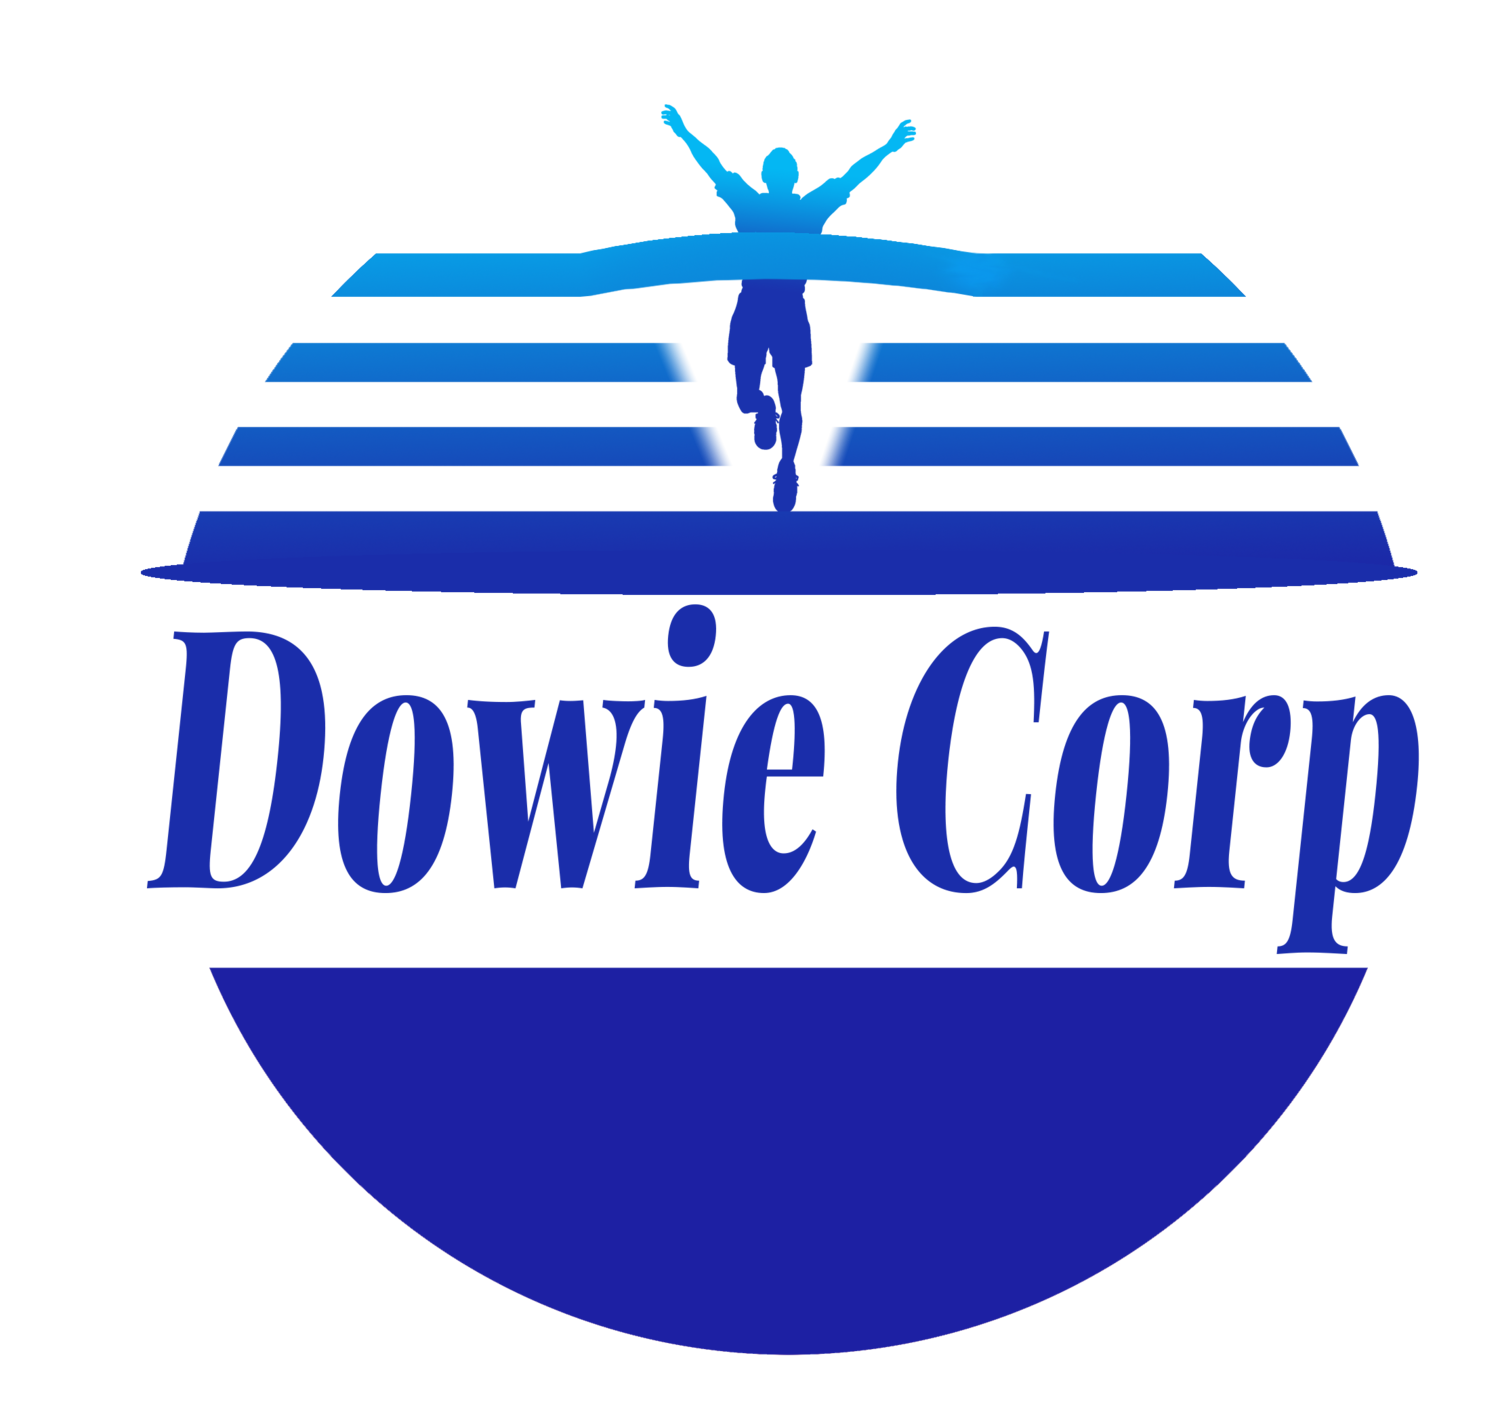 Dowie Corp